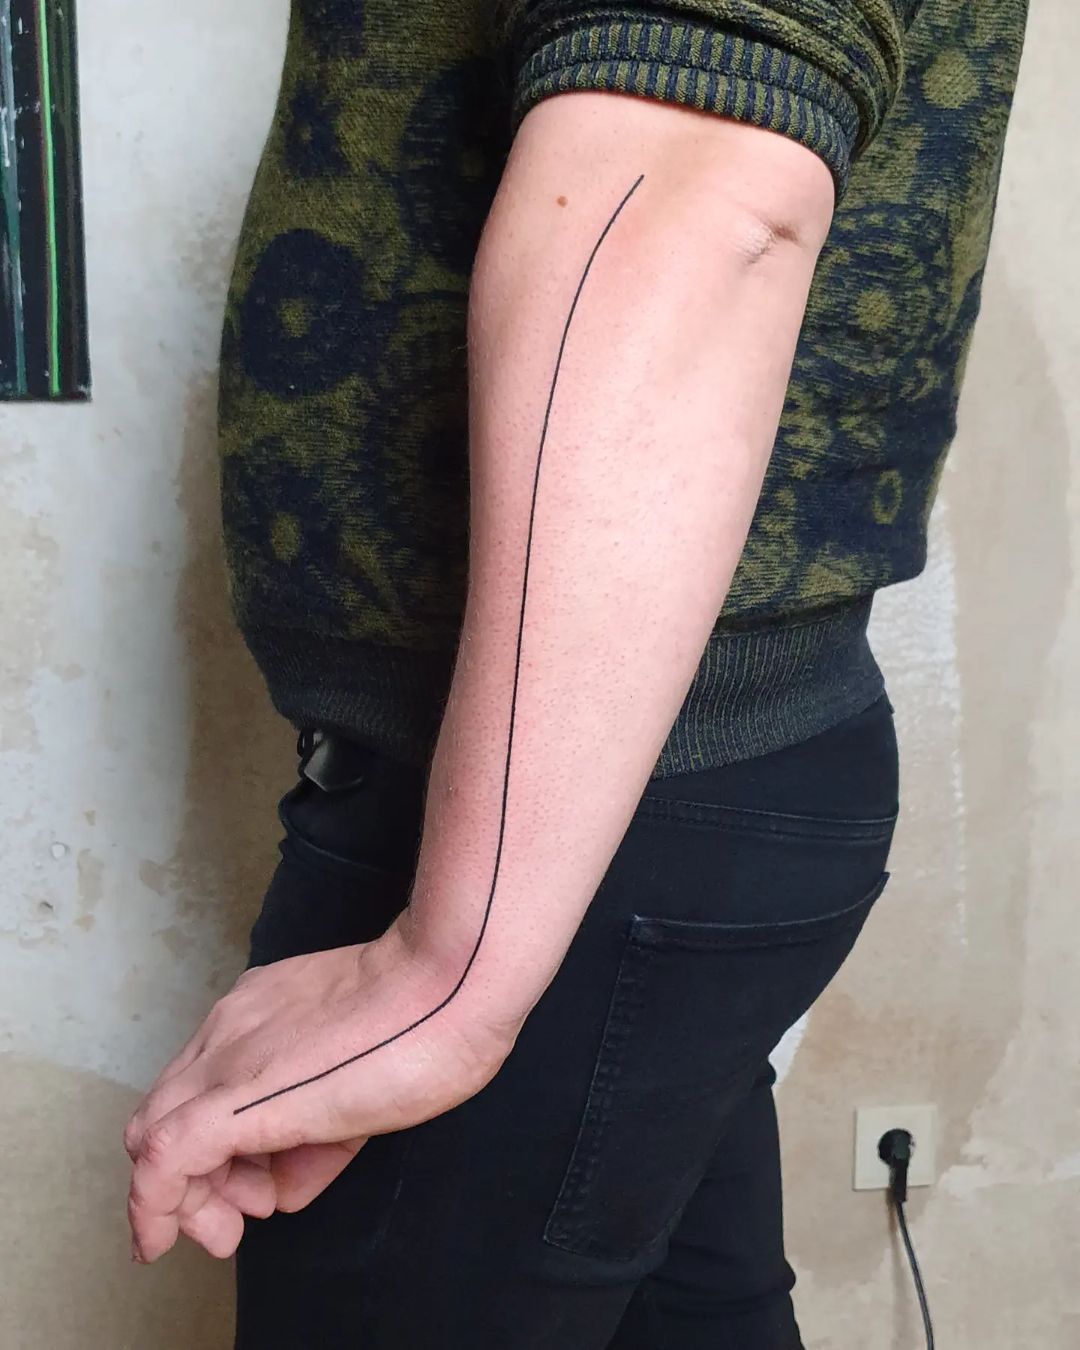 Straight Line Tattoos Meaning: Straight Line Tattoos Meaning and Designs A Comprehensive Guide